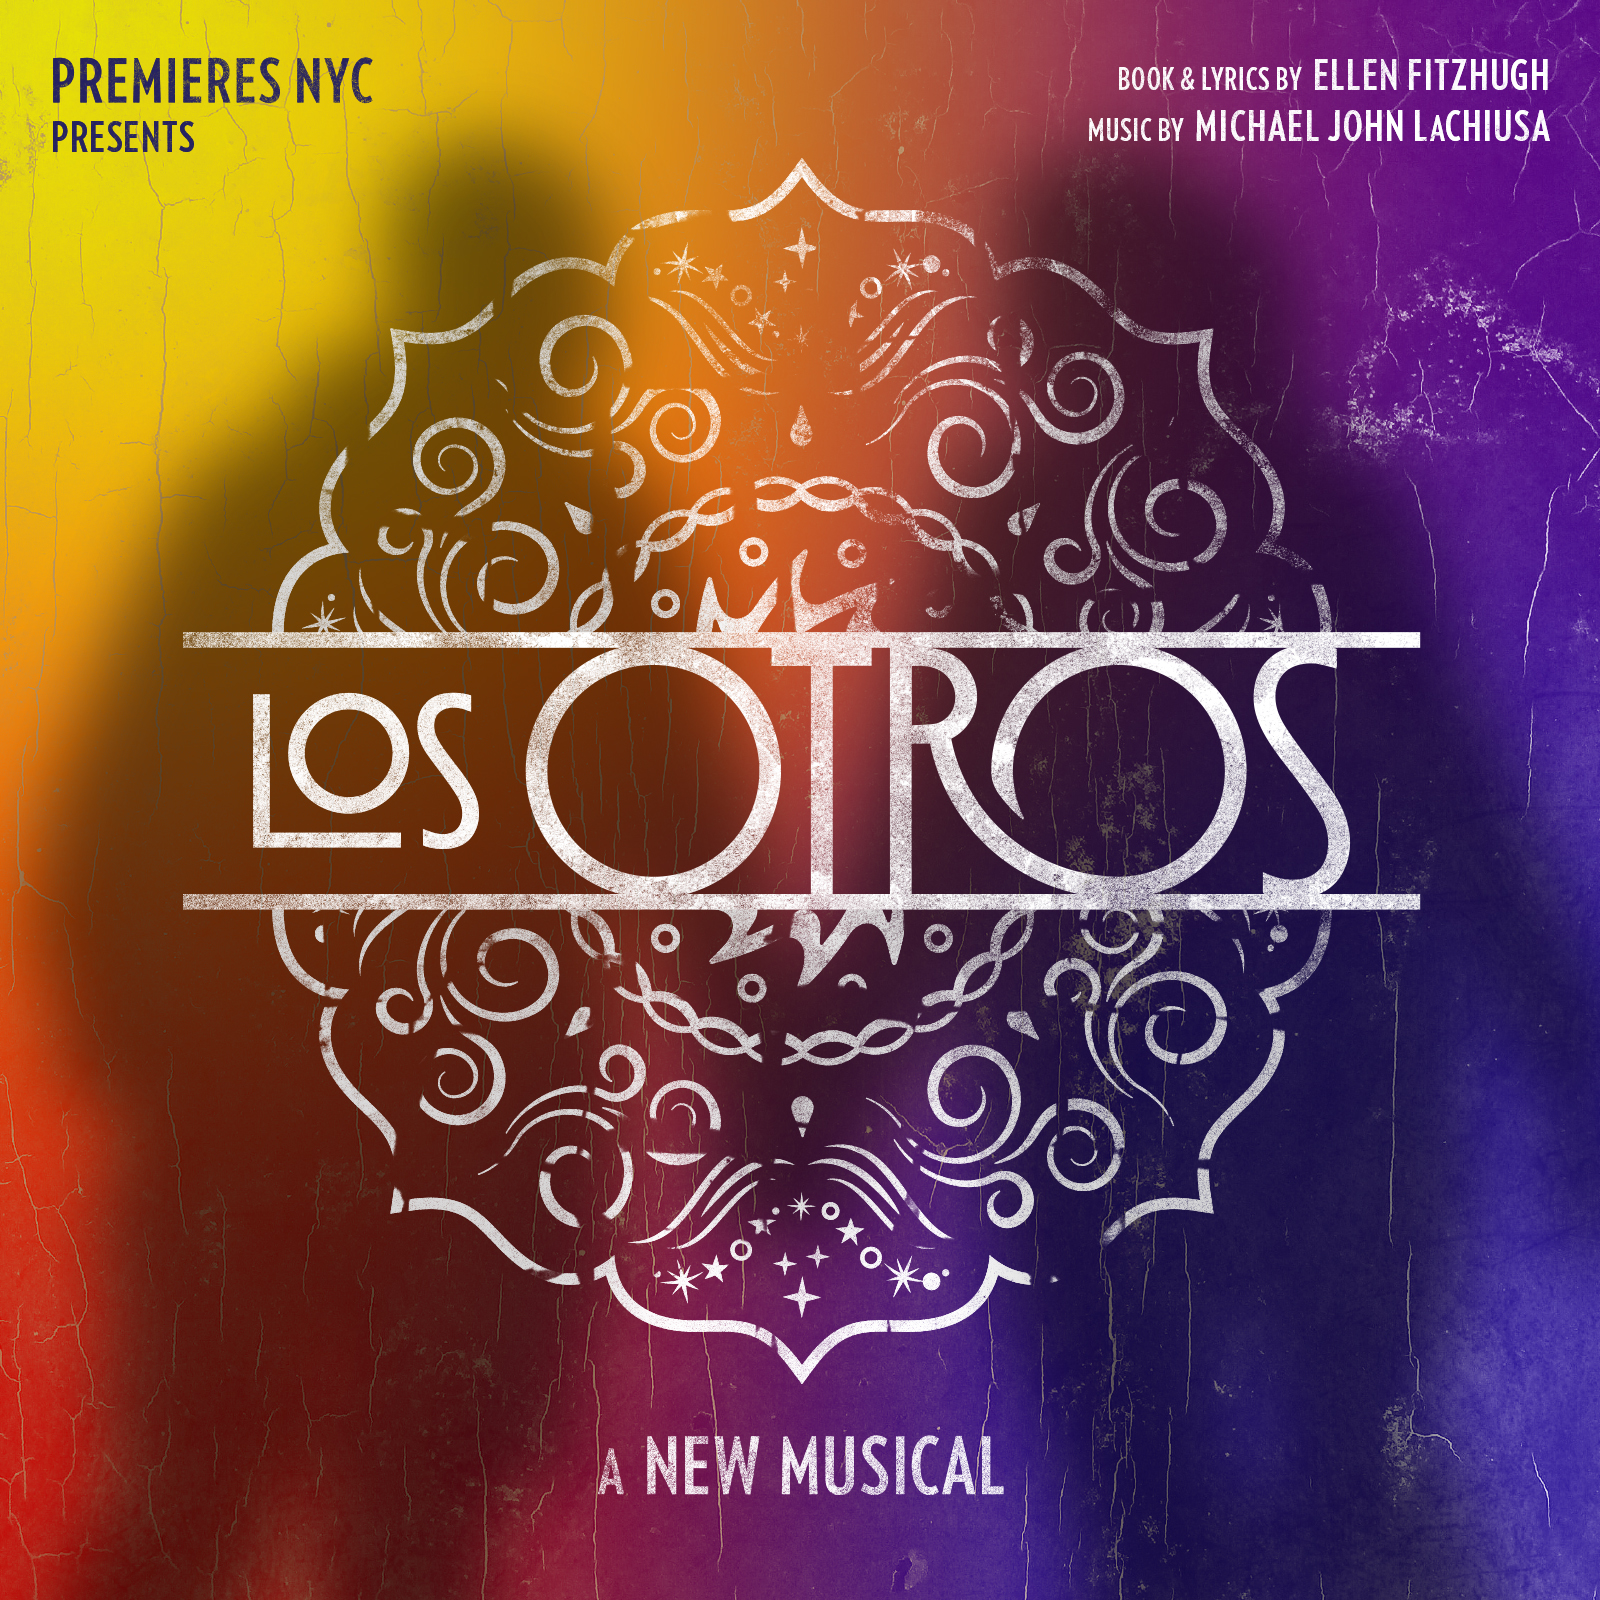 Logo for Los Otros. Beginning in the upper right hand corner there is a color gradient ending in the lower right hand corner. It begins with yellow, then, orange, red, blue, and into purple. In the center is a mandala design, with the words LOS OTROS dividing it in the center. Superimposed on this image are two shadows, a man on the left, and a woman on the right. They are holding hands.